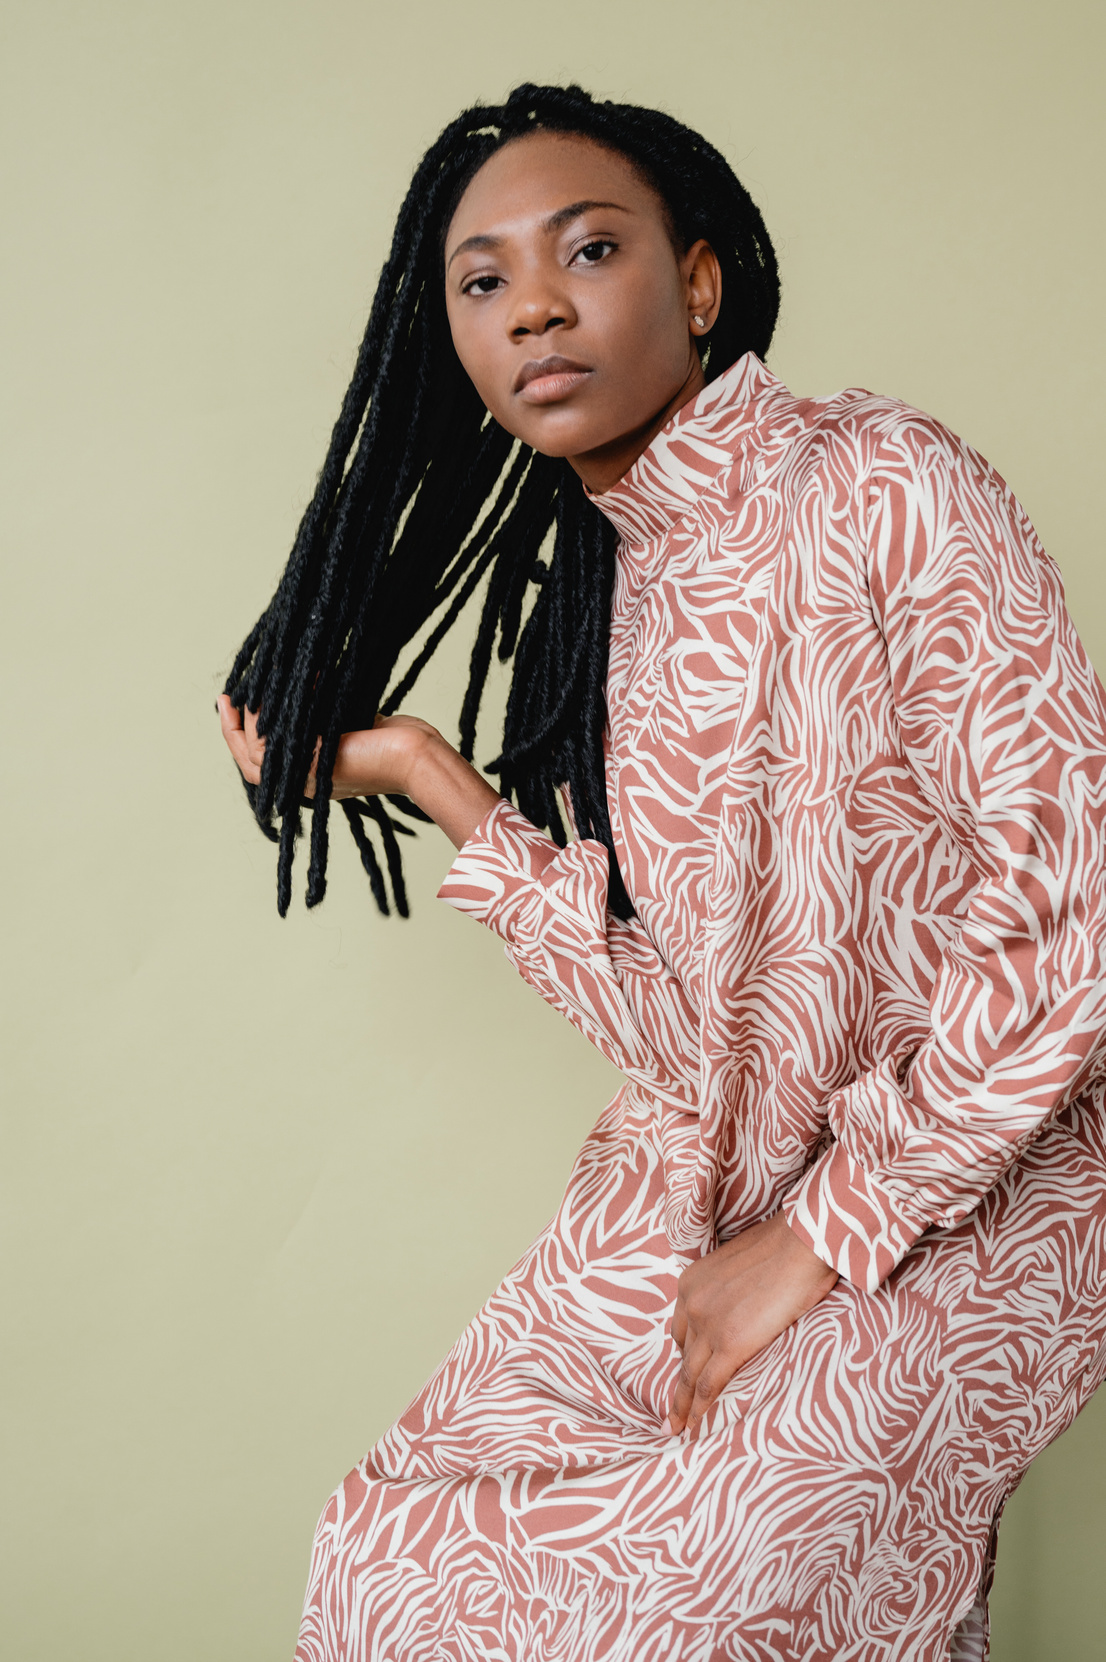 Young Woman in Animal Print Long Sleeve Dress with Dreadlocks